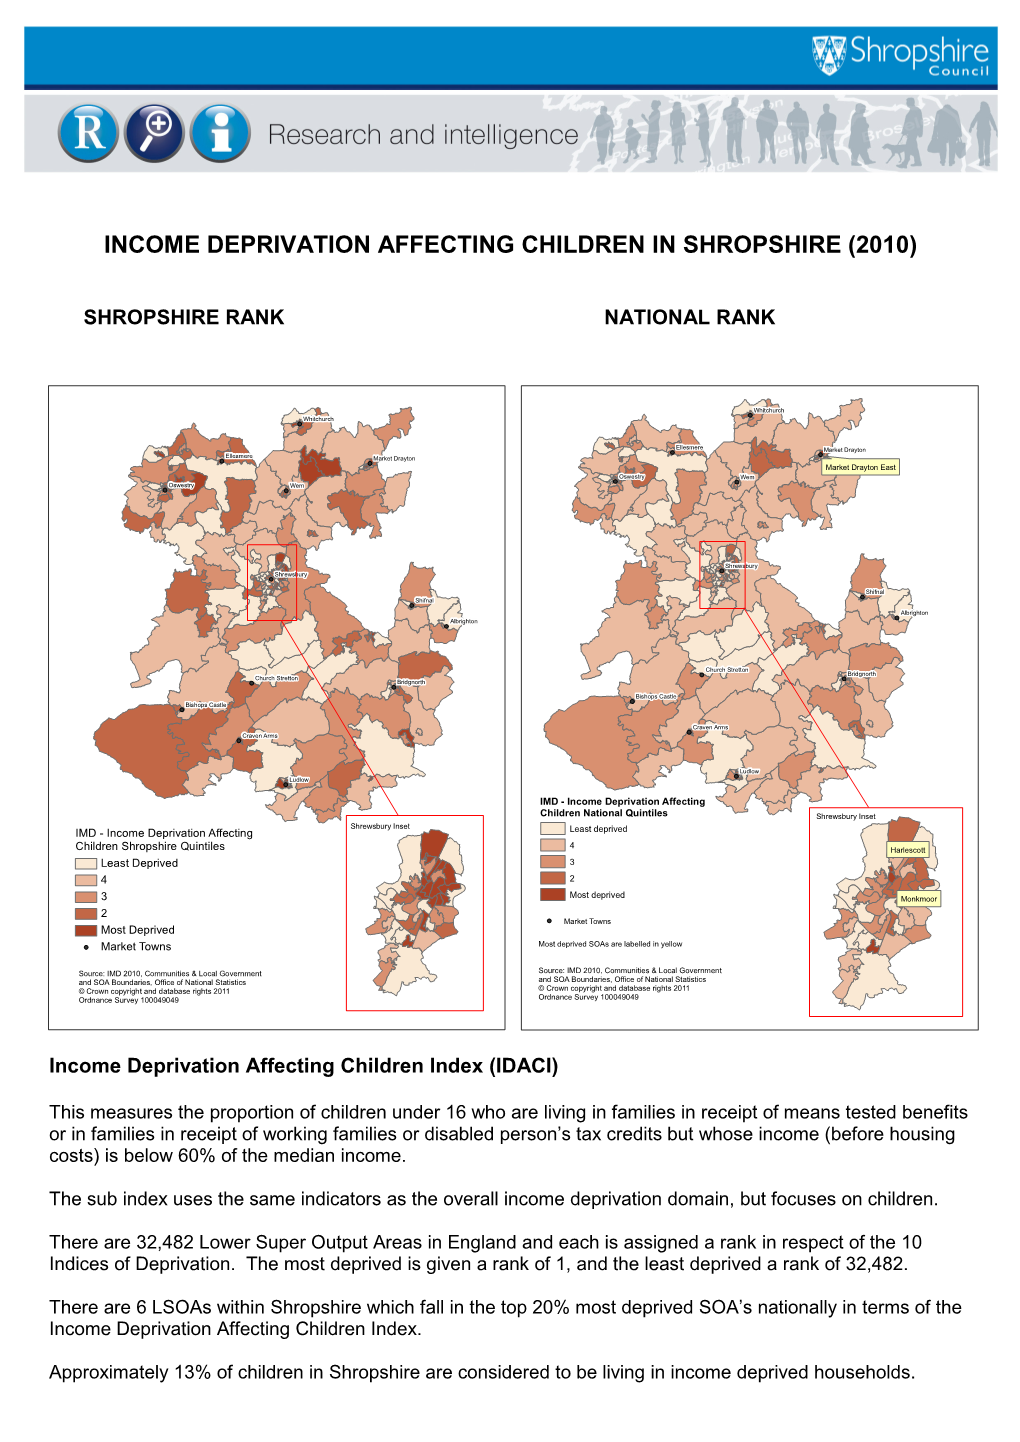 Income Deprivation Affecting Children in Shropshire (2010)